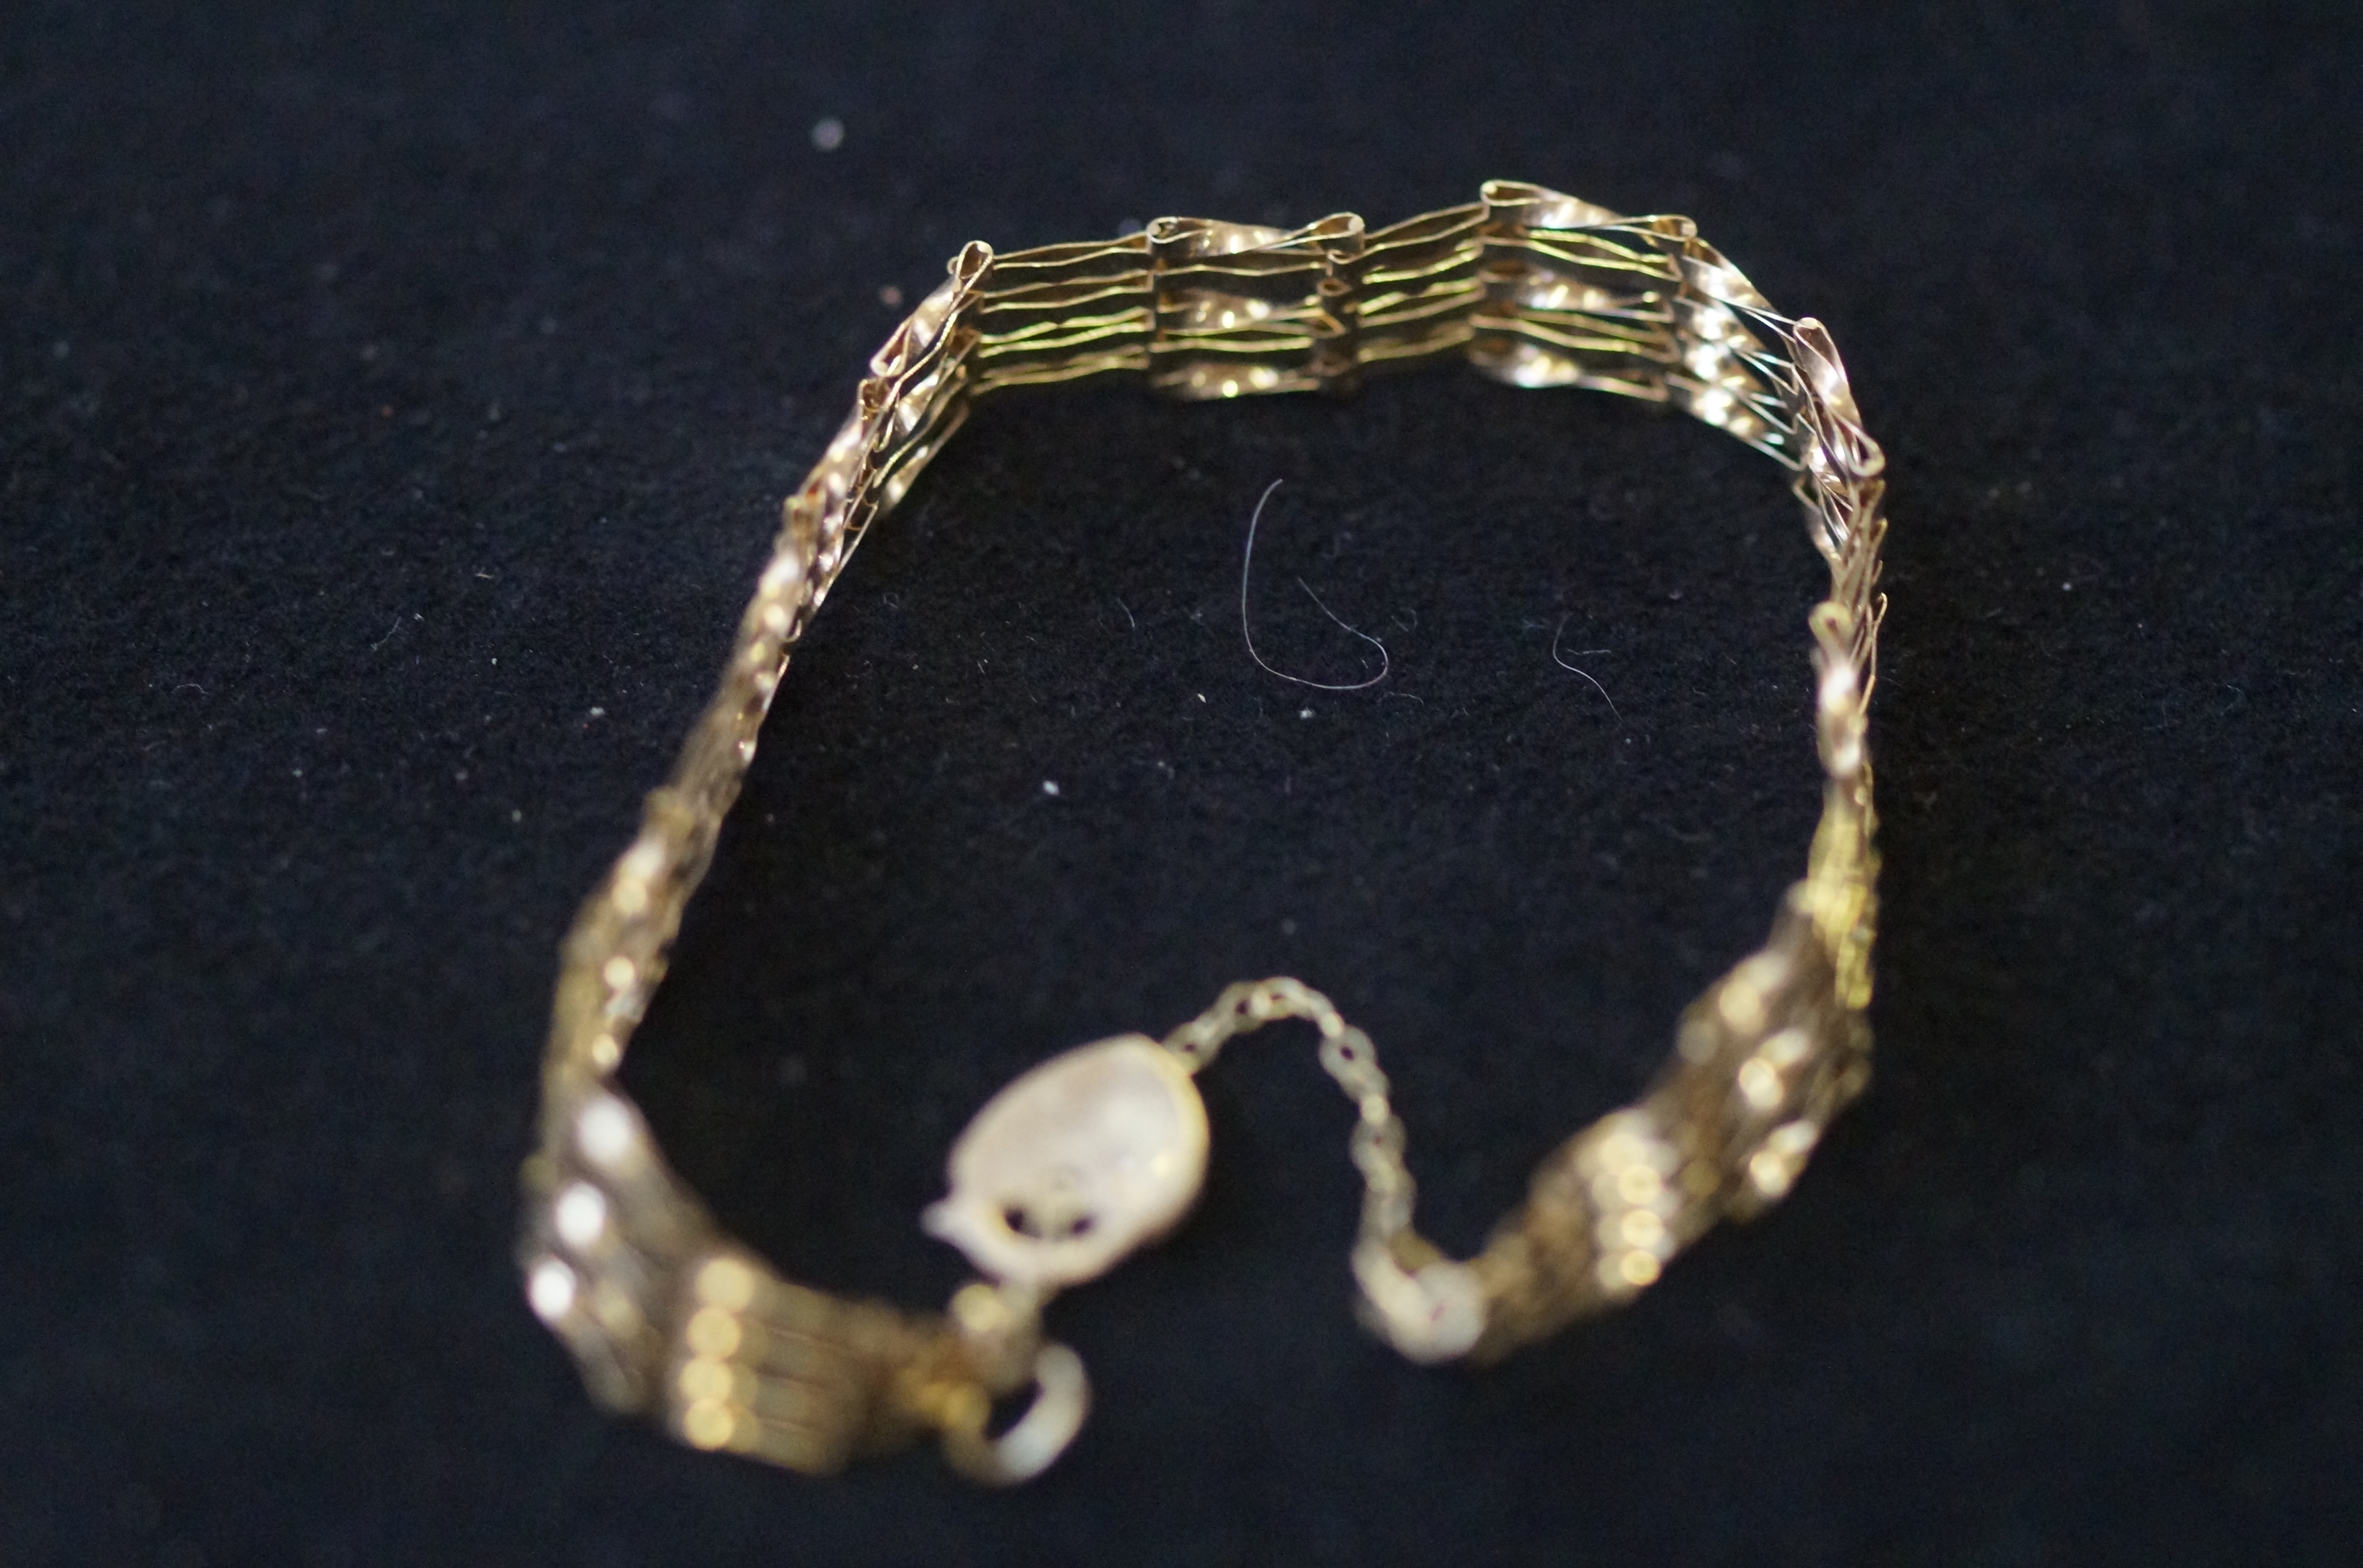 9ct Gold gate bracelet with safety chain & heart s